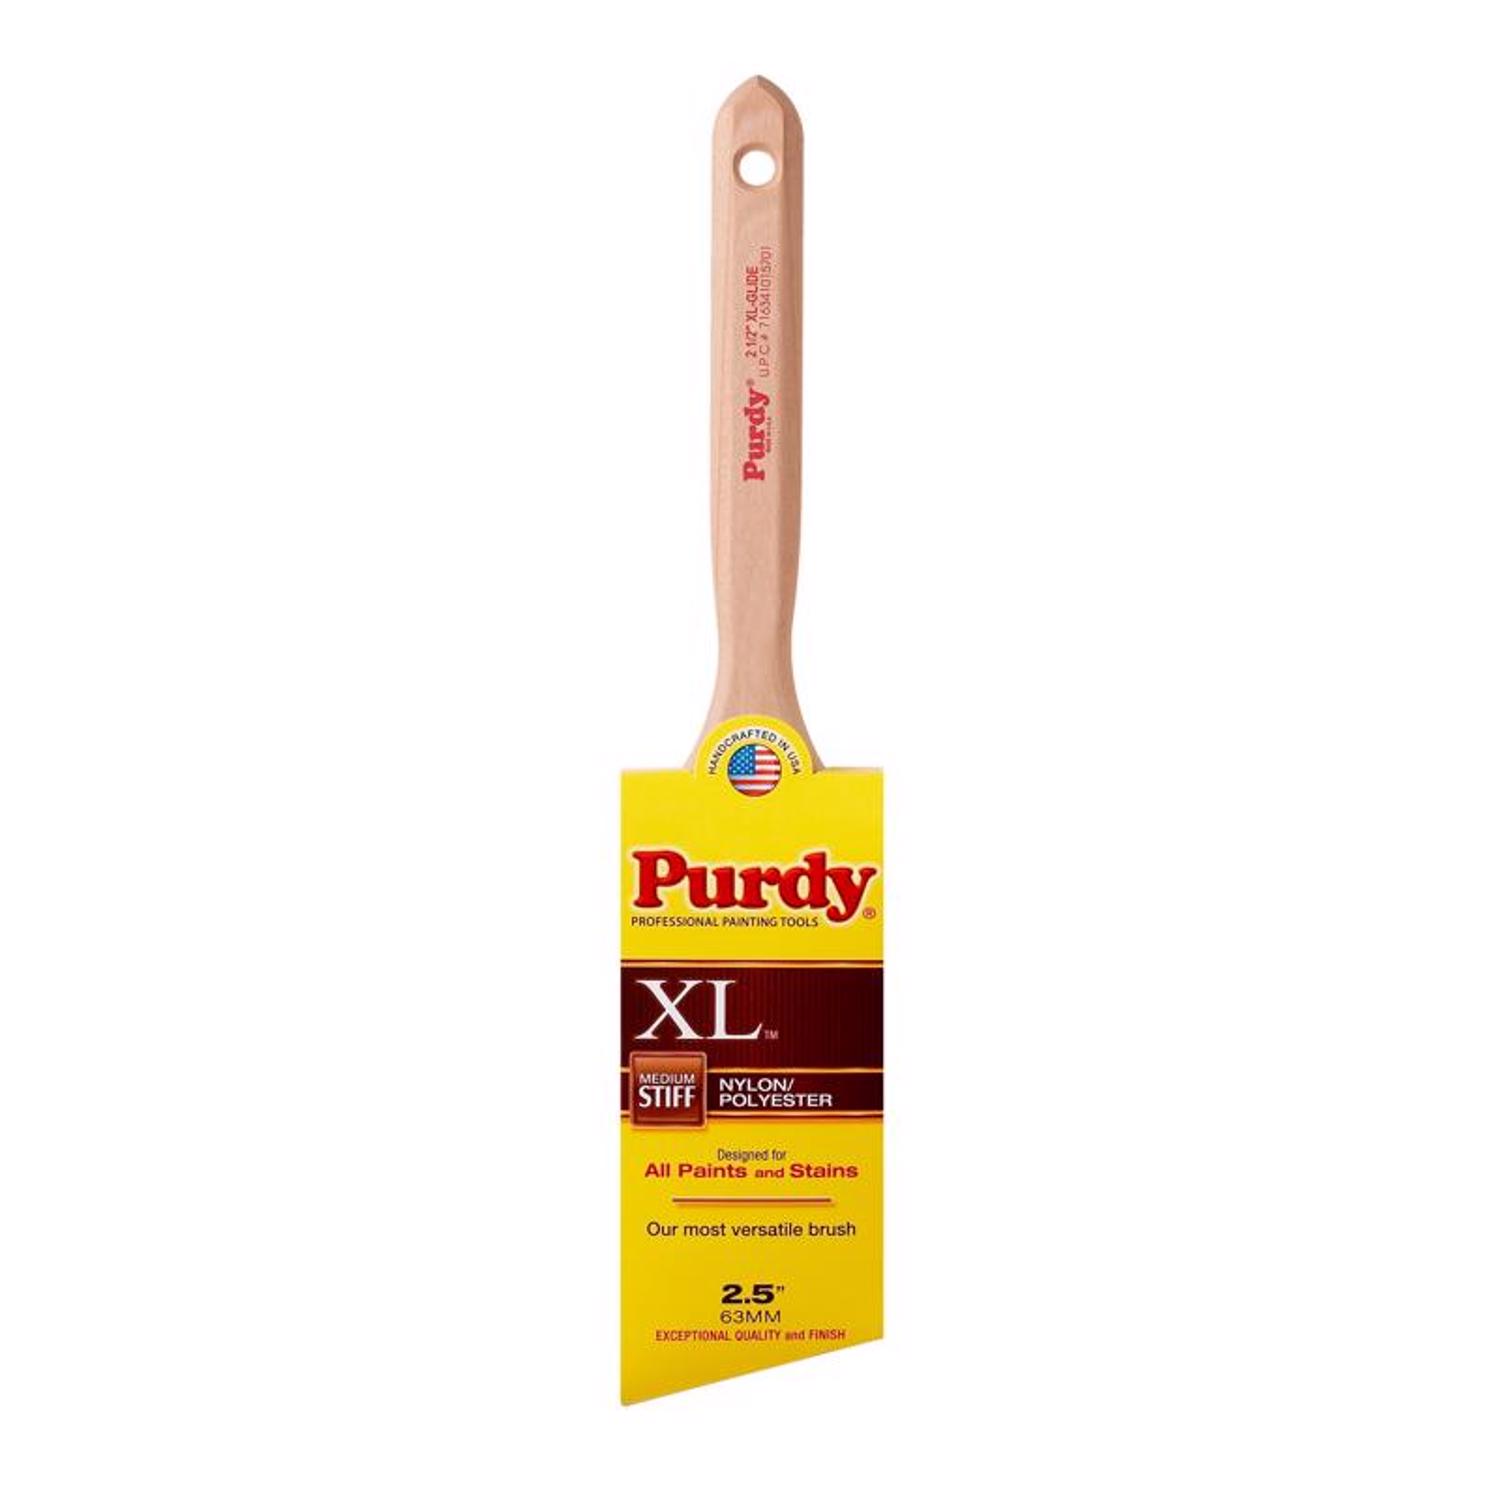 Photos - Putty Knife / Painting Tool Purdy XL Glide 2-1/2 in. Medium Stiff Angle Trim Paint Brush 144152325